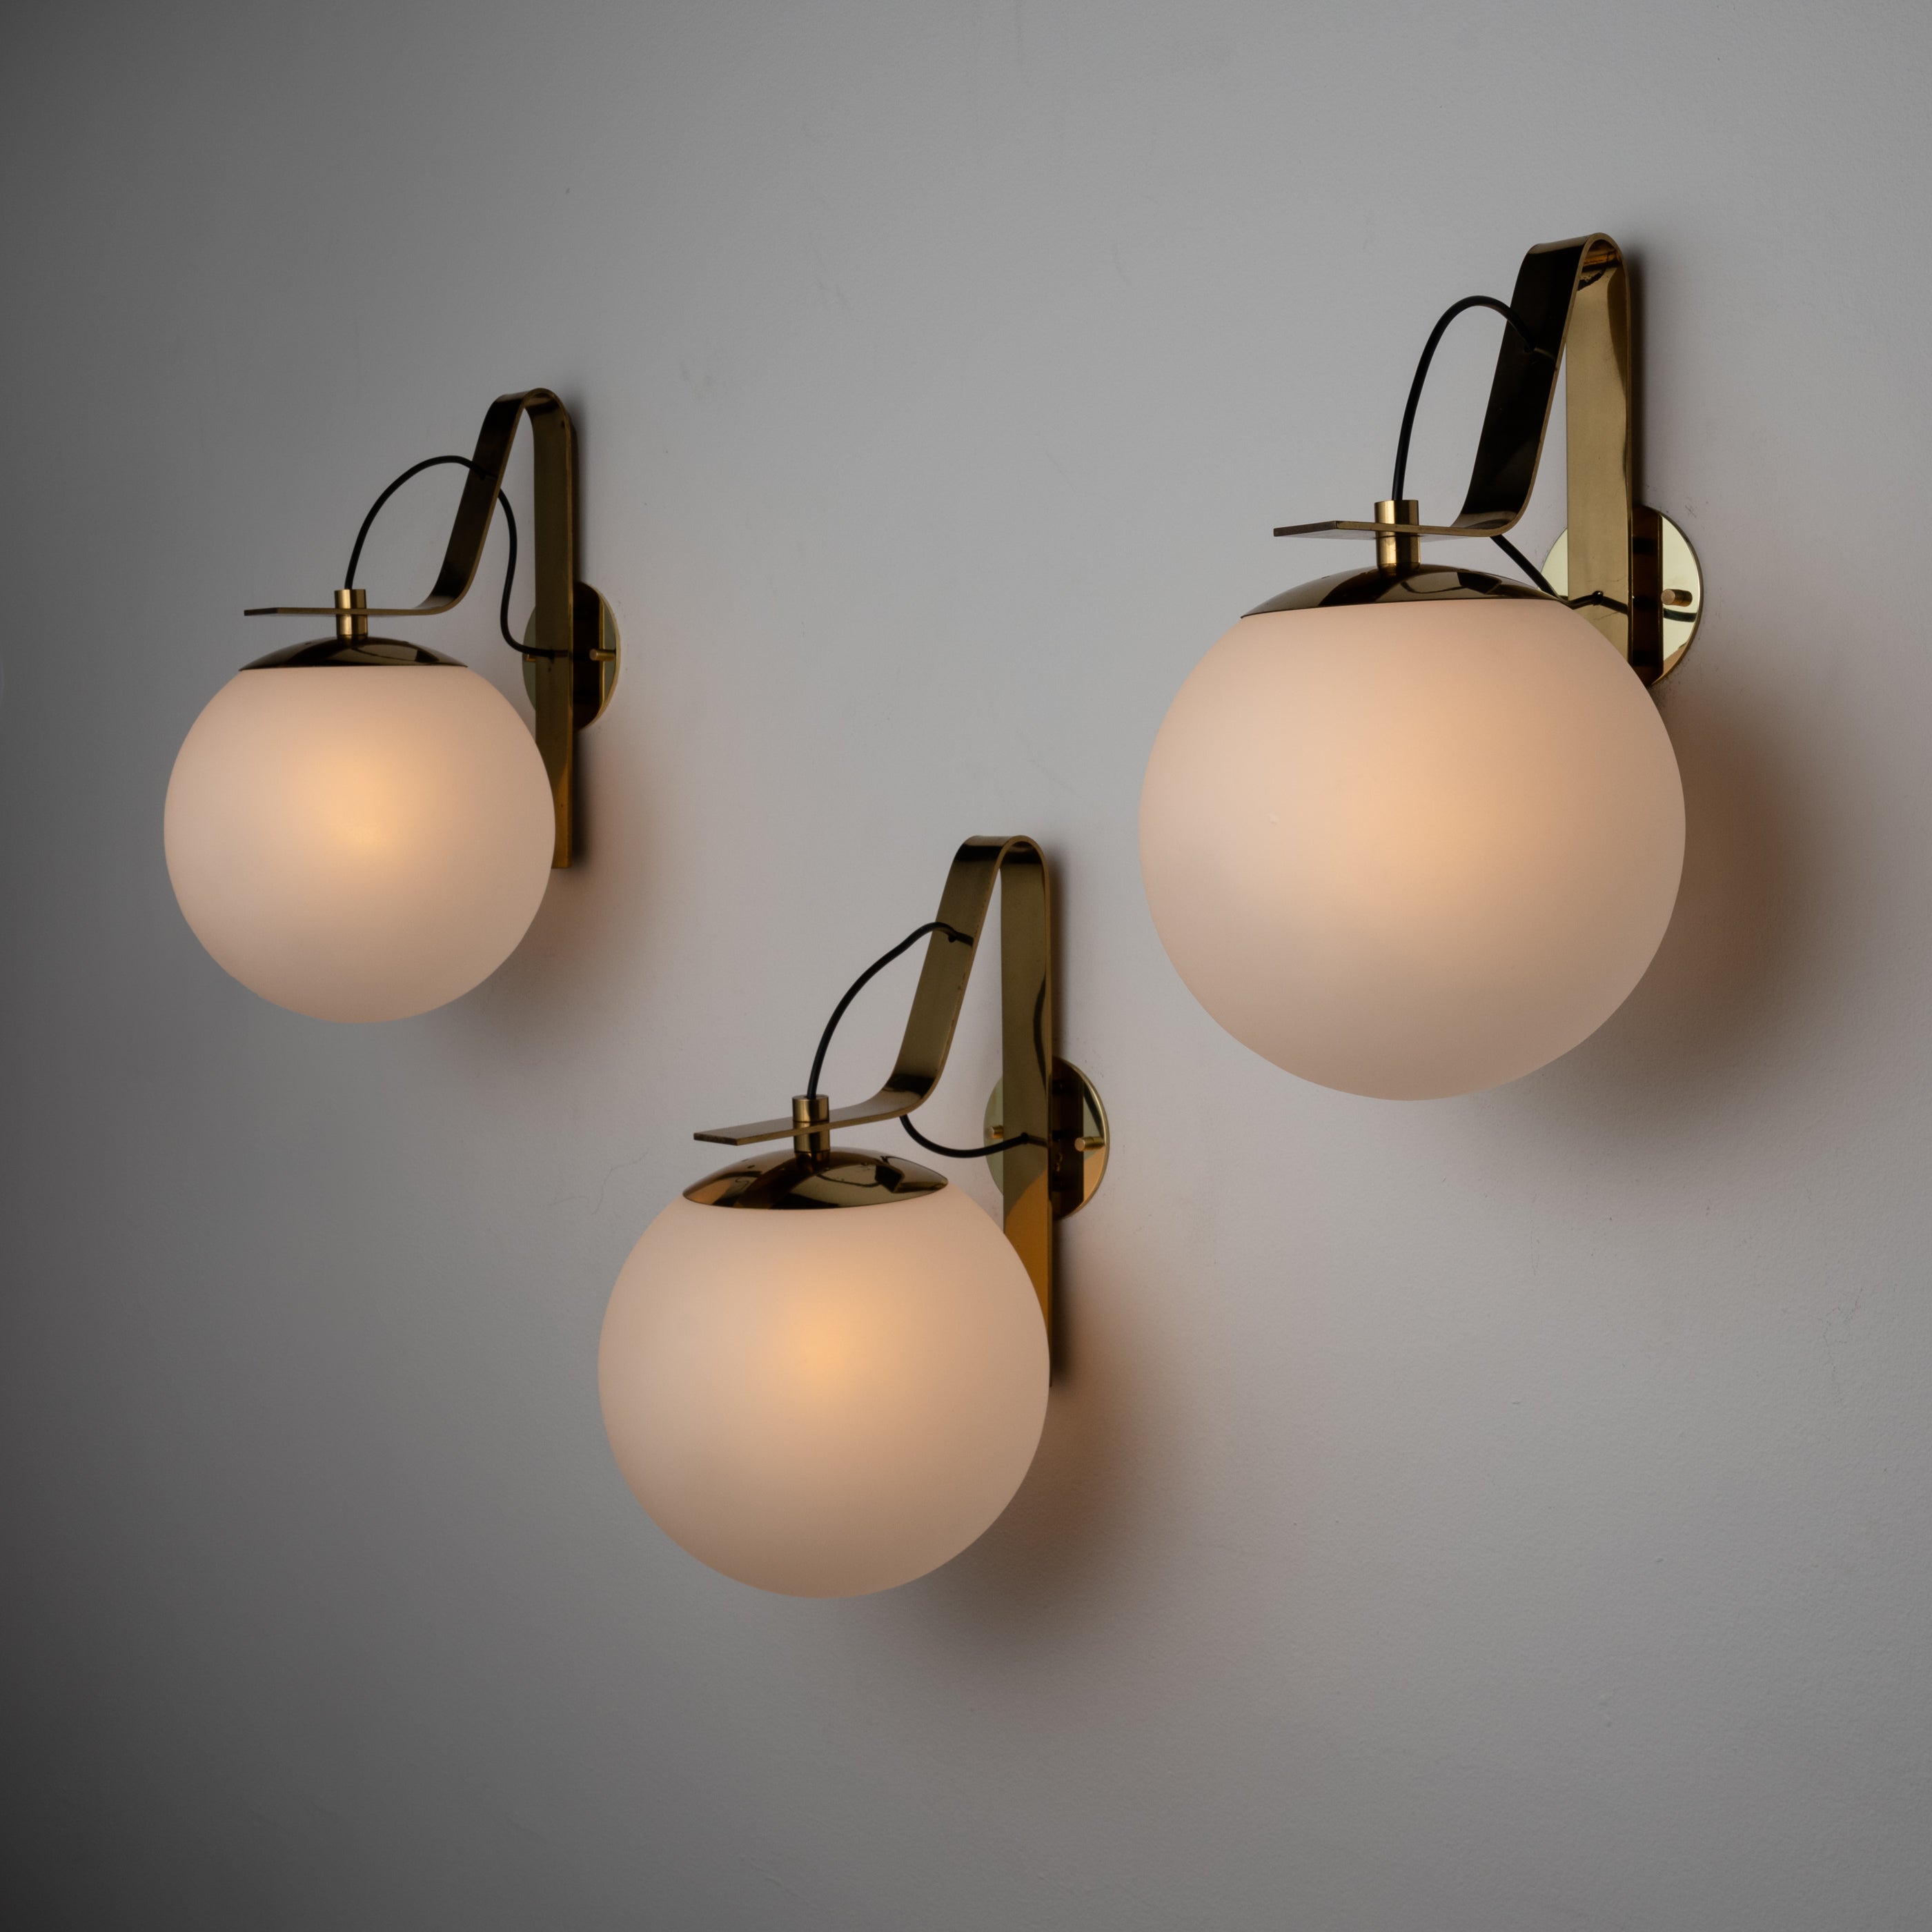 Model B464 Sconces by Sergio Asti for Candle 3